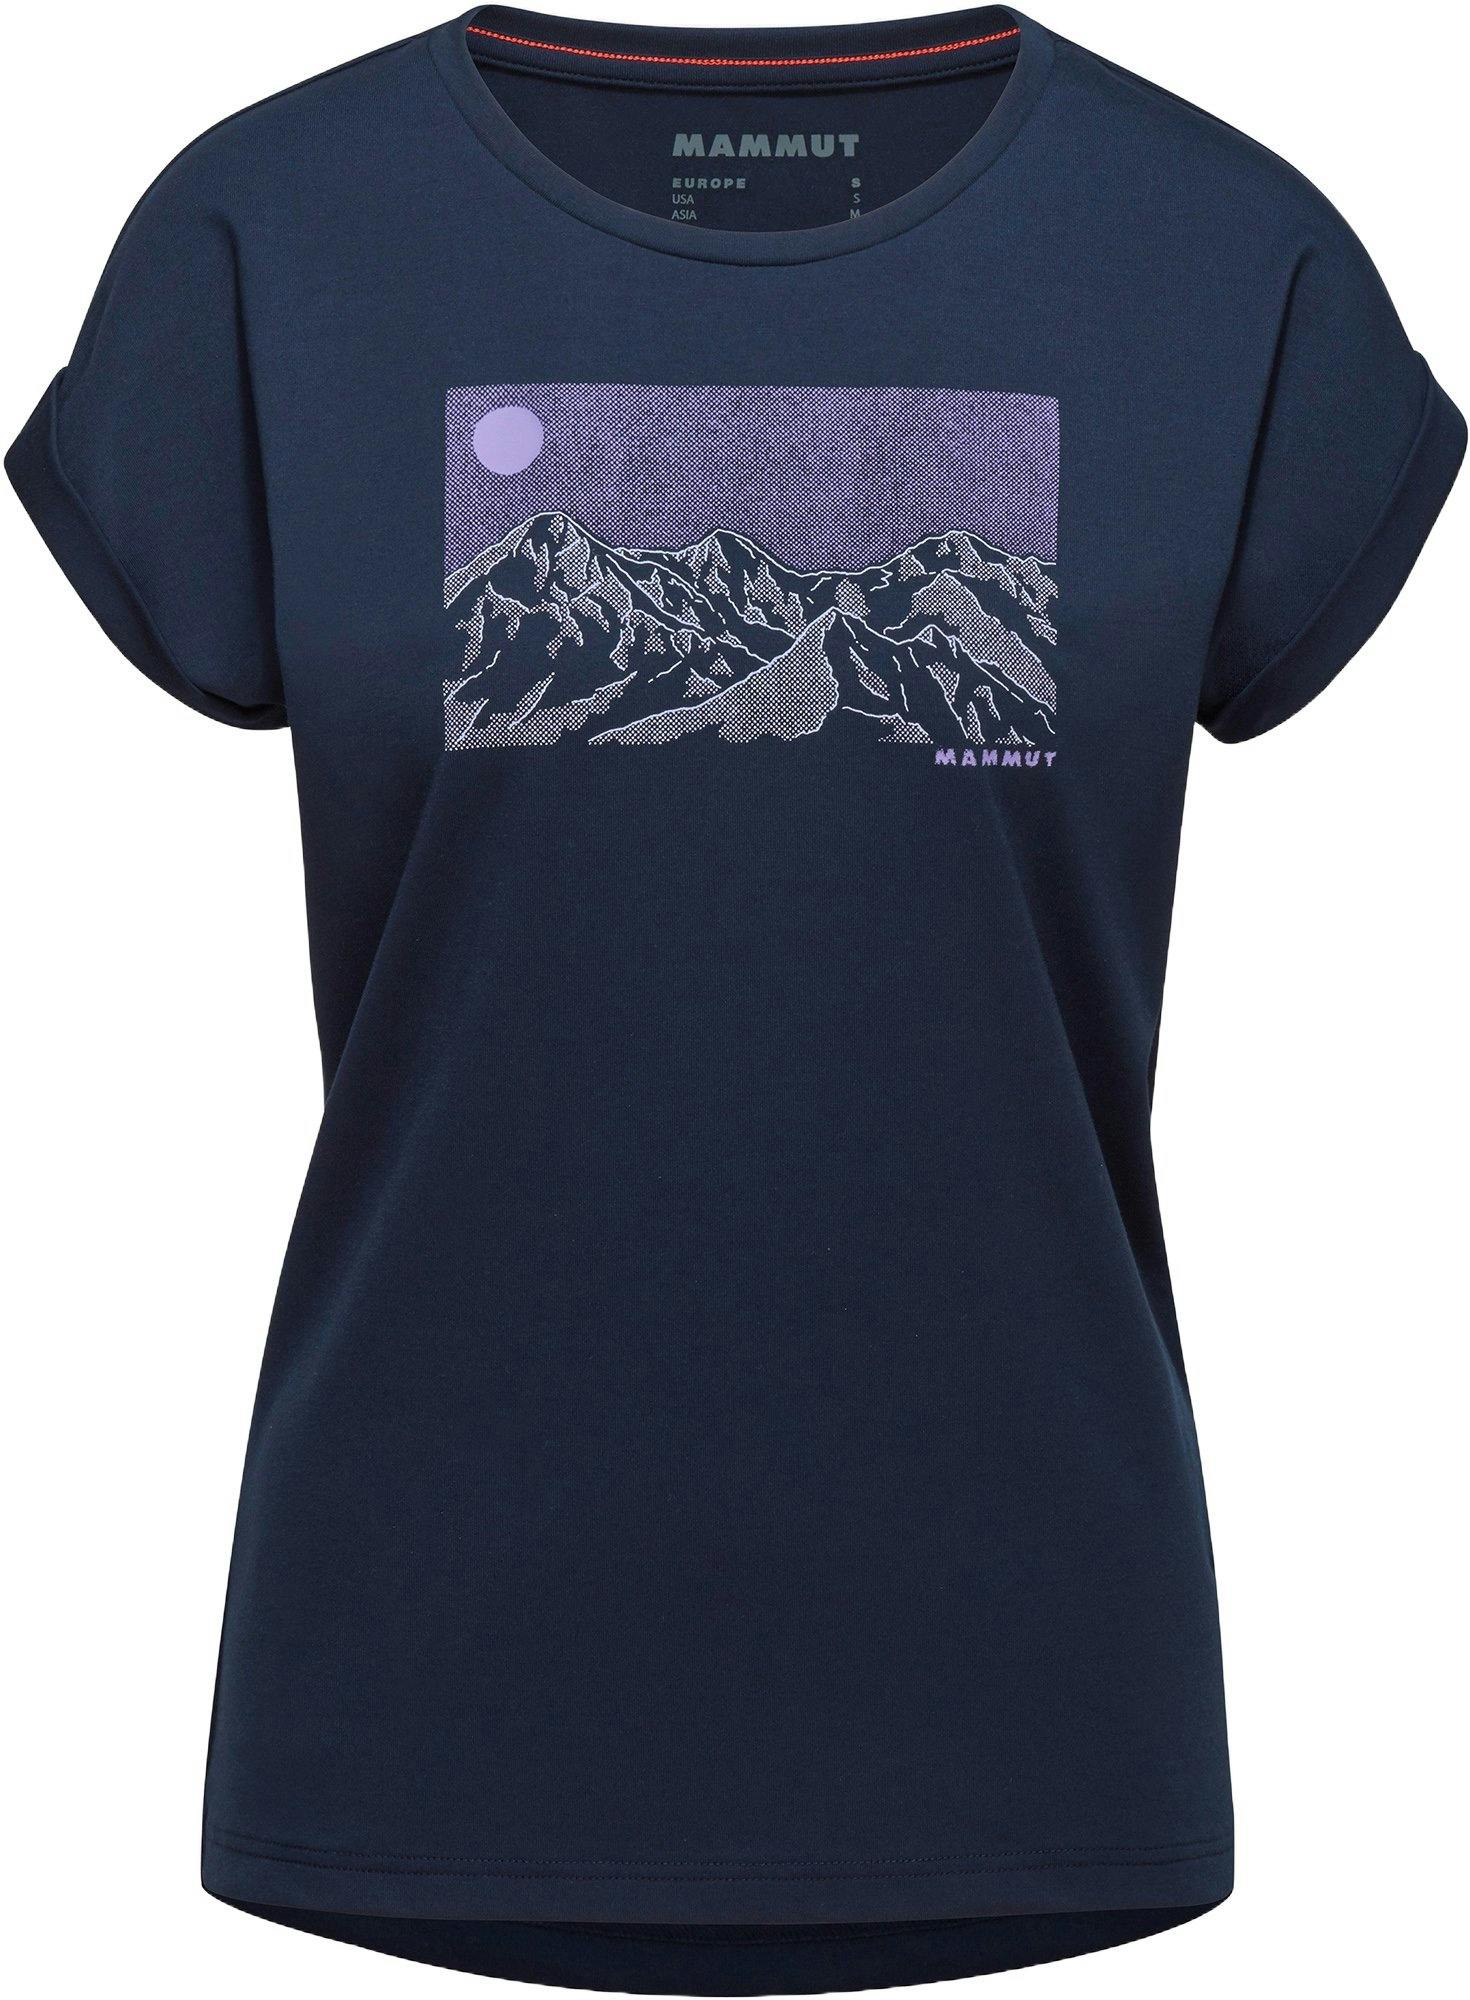 Product image for Mountain Trilogy T-Shirt - Women's